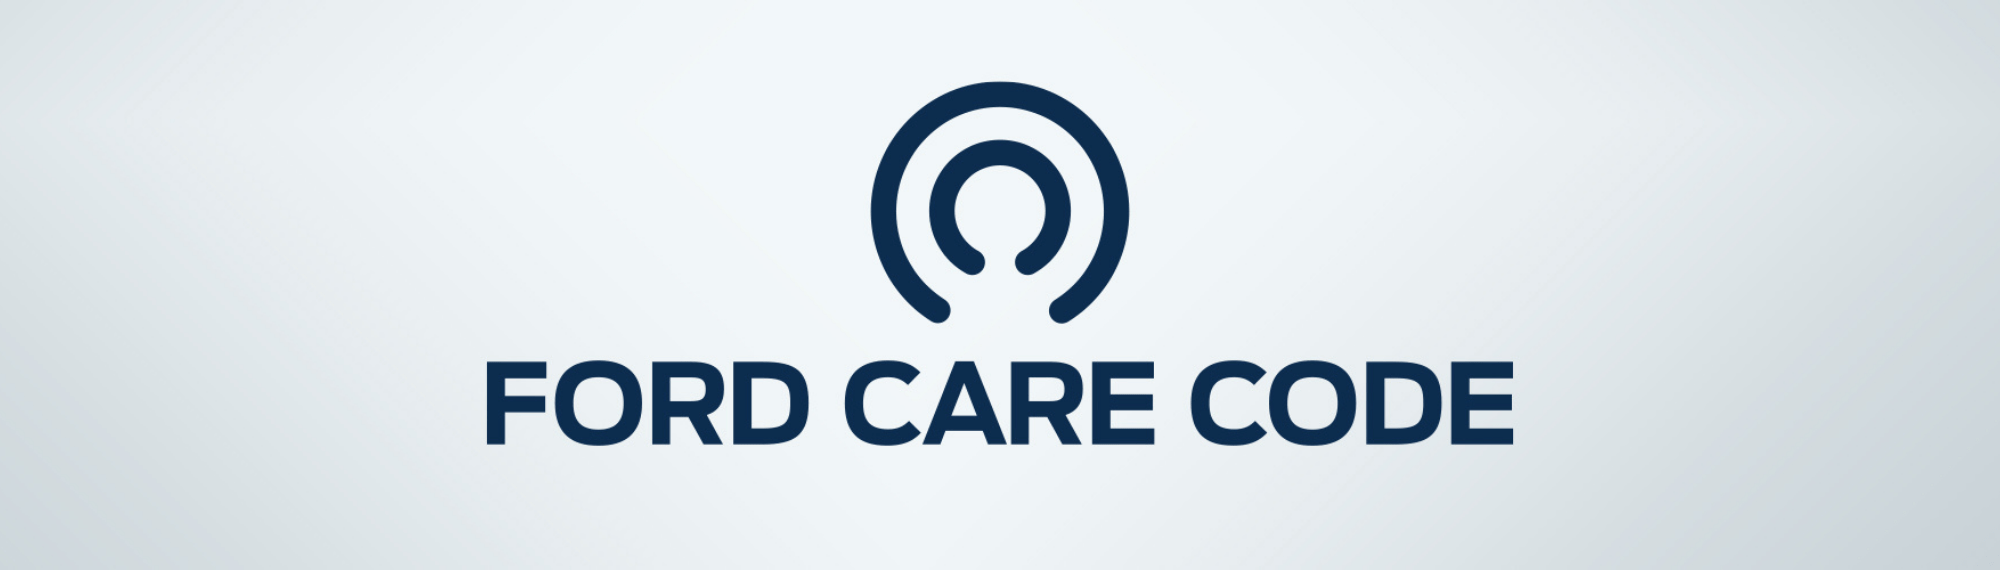 Ford Care Code Image